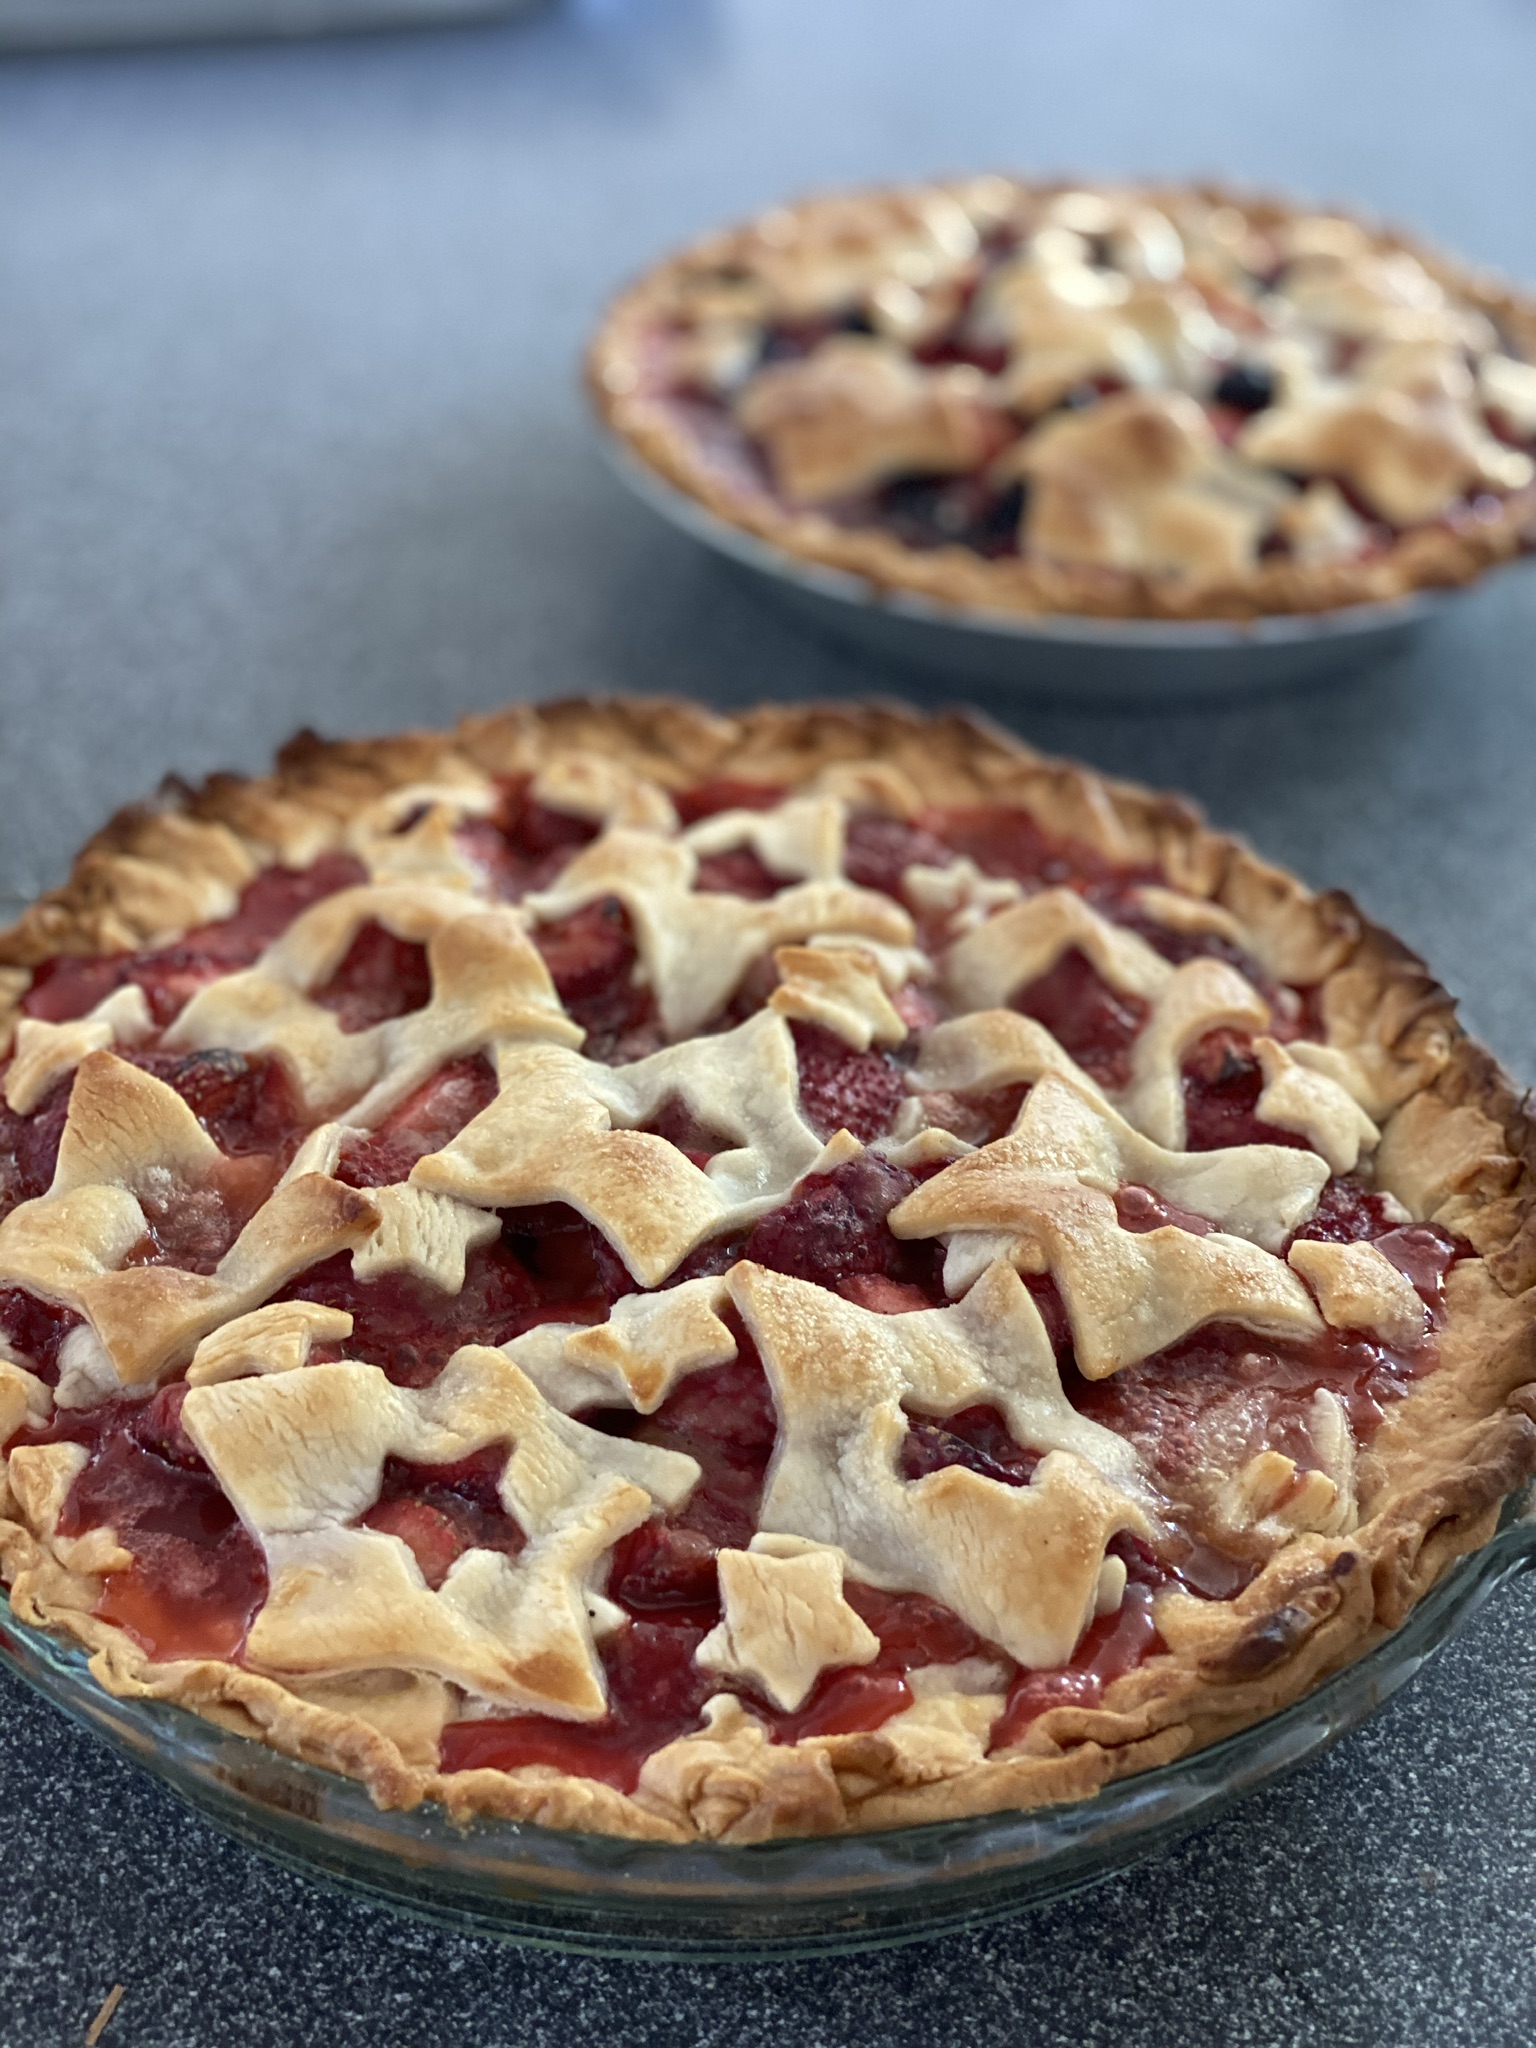 Most Spectacular Strawberry Pie